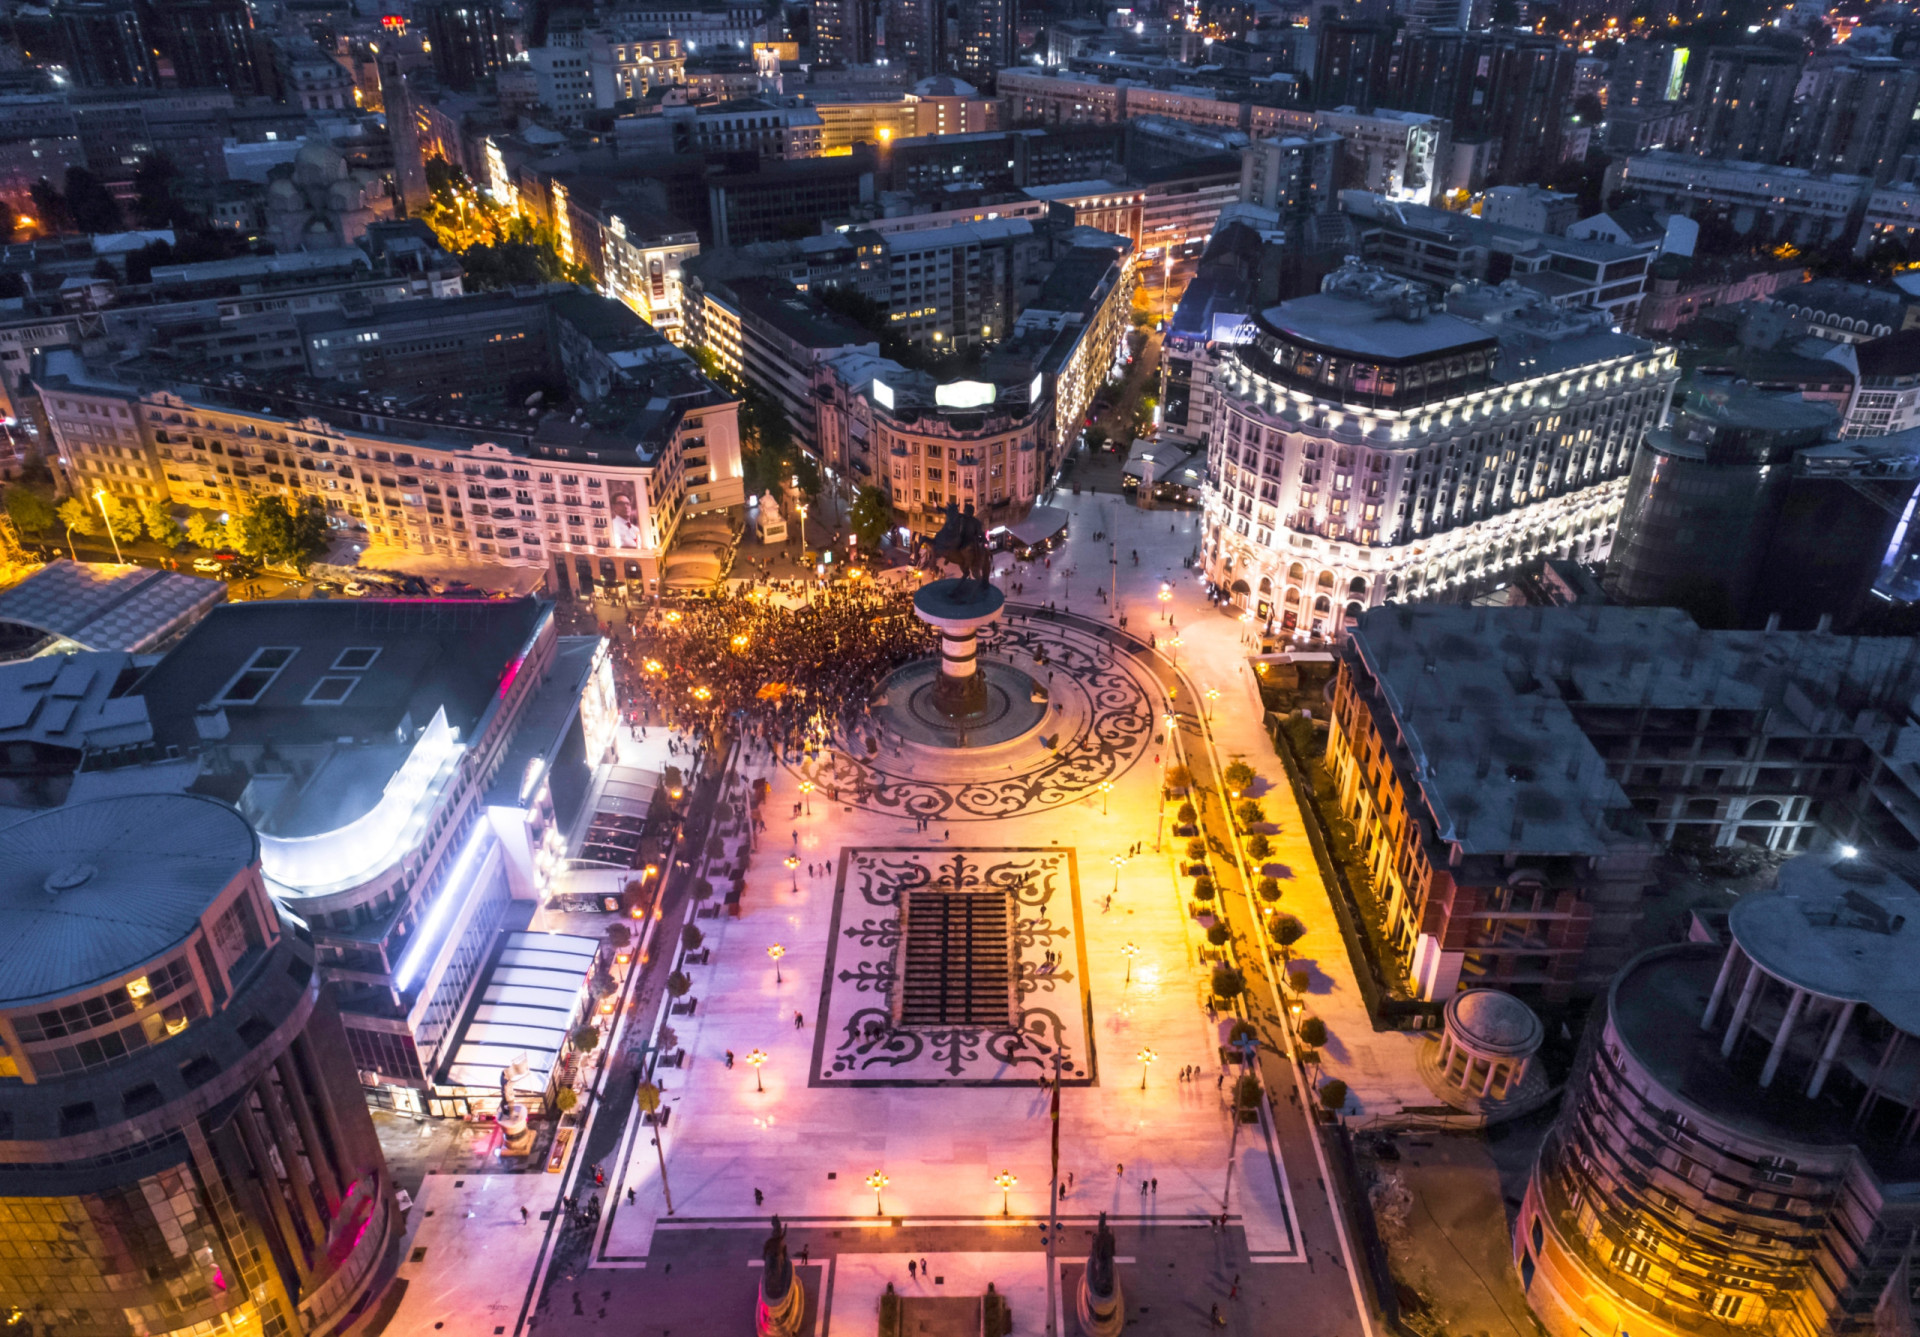 <p>The capital and largest city of North Macedonia, Skopje has a history that spans over 3,000 years. Ruled first by the Paeonians and then the Romans, Skopje flourished under the <a href="https://www.starsinsider.com/lifestyle/500782/curiosities-you-didnt-know-about-the-byzantine-empire" rel="noopener">Byzantines</a>, who clashed with the Bulgarian Empire for control of the city. Later part of the Serbian Empire until it was conquered by Ottoman Turks, Skopje's multifaceted and often complex history is evident in its architecture and myriad of visitor attractions.</p><p><a href="https://www.msn.com/en-us/community/channel/vid-7xx8mnucu55yw63we9va2gwr7uihbxwc68fxqp25x6tg4ftibpra?cvid=94631541bc0f4f89bfd59158d696ad7e">Follow us and access great exclusive content every day</a></p>